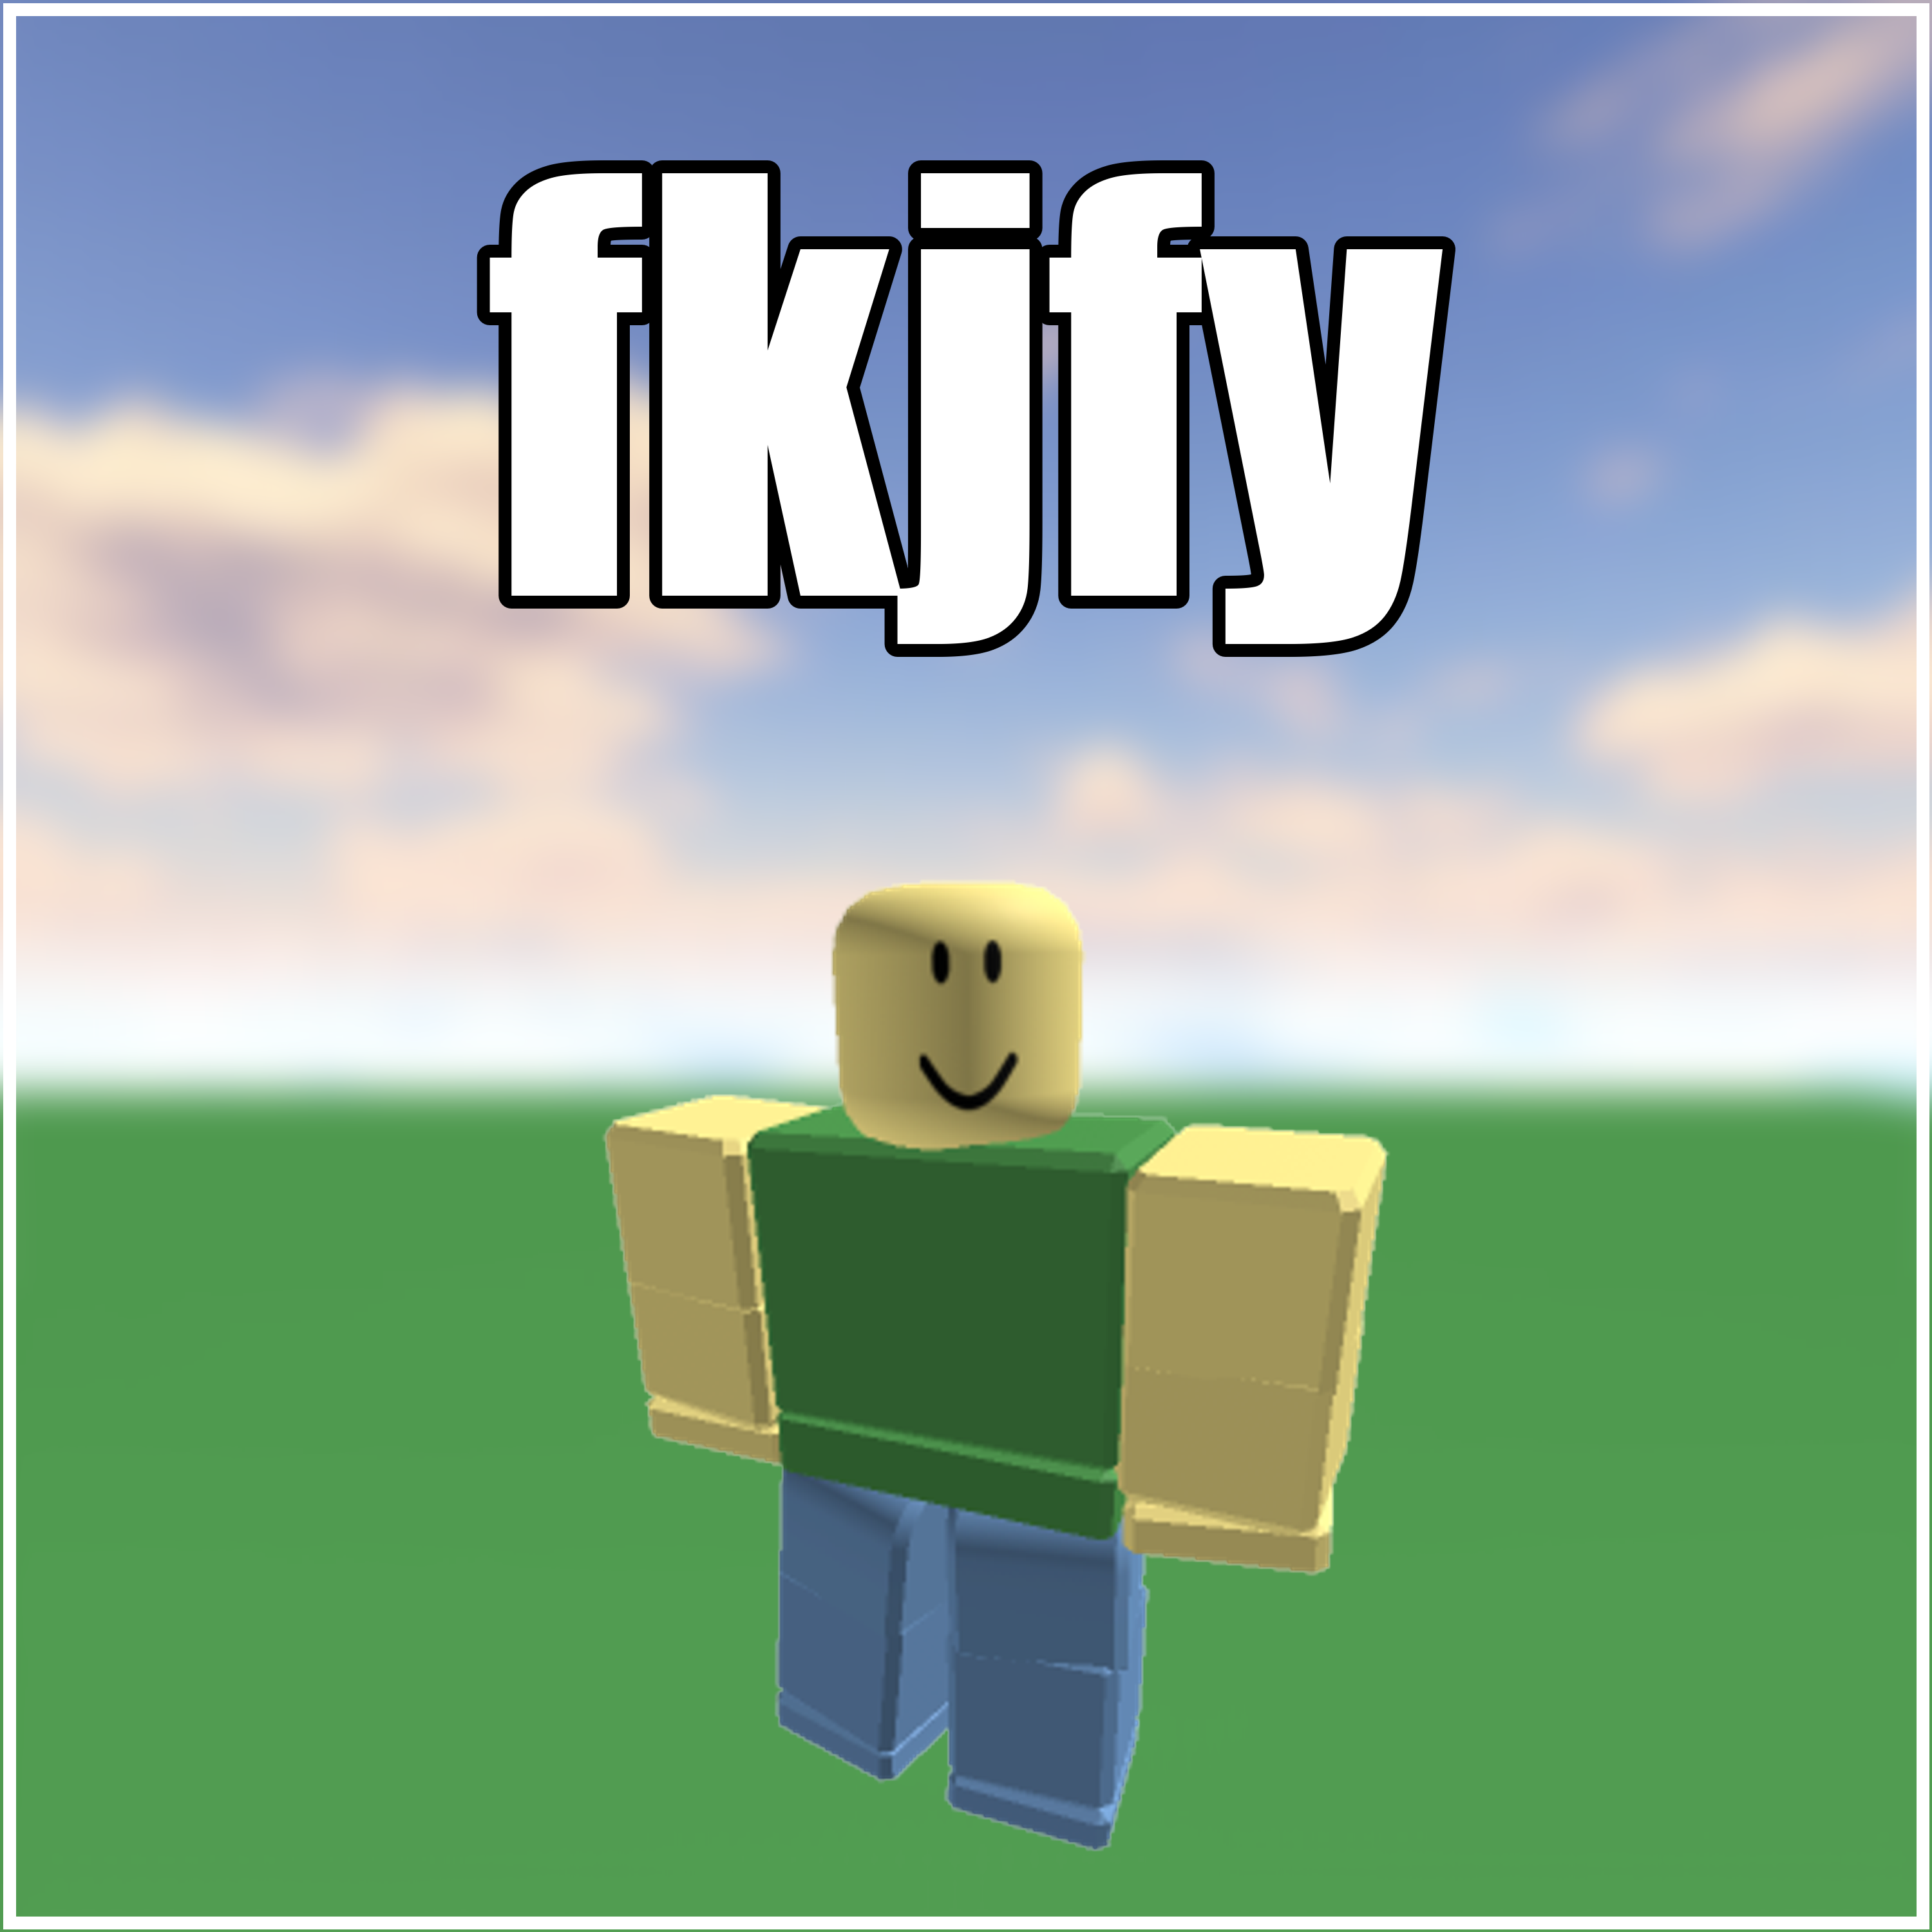 robruh RARE username "fkjfy" ROBLOX account guaranteed to be unverified!